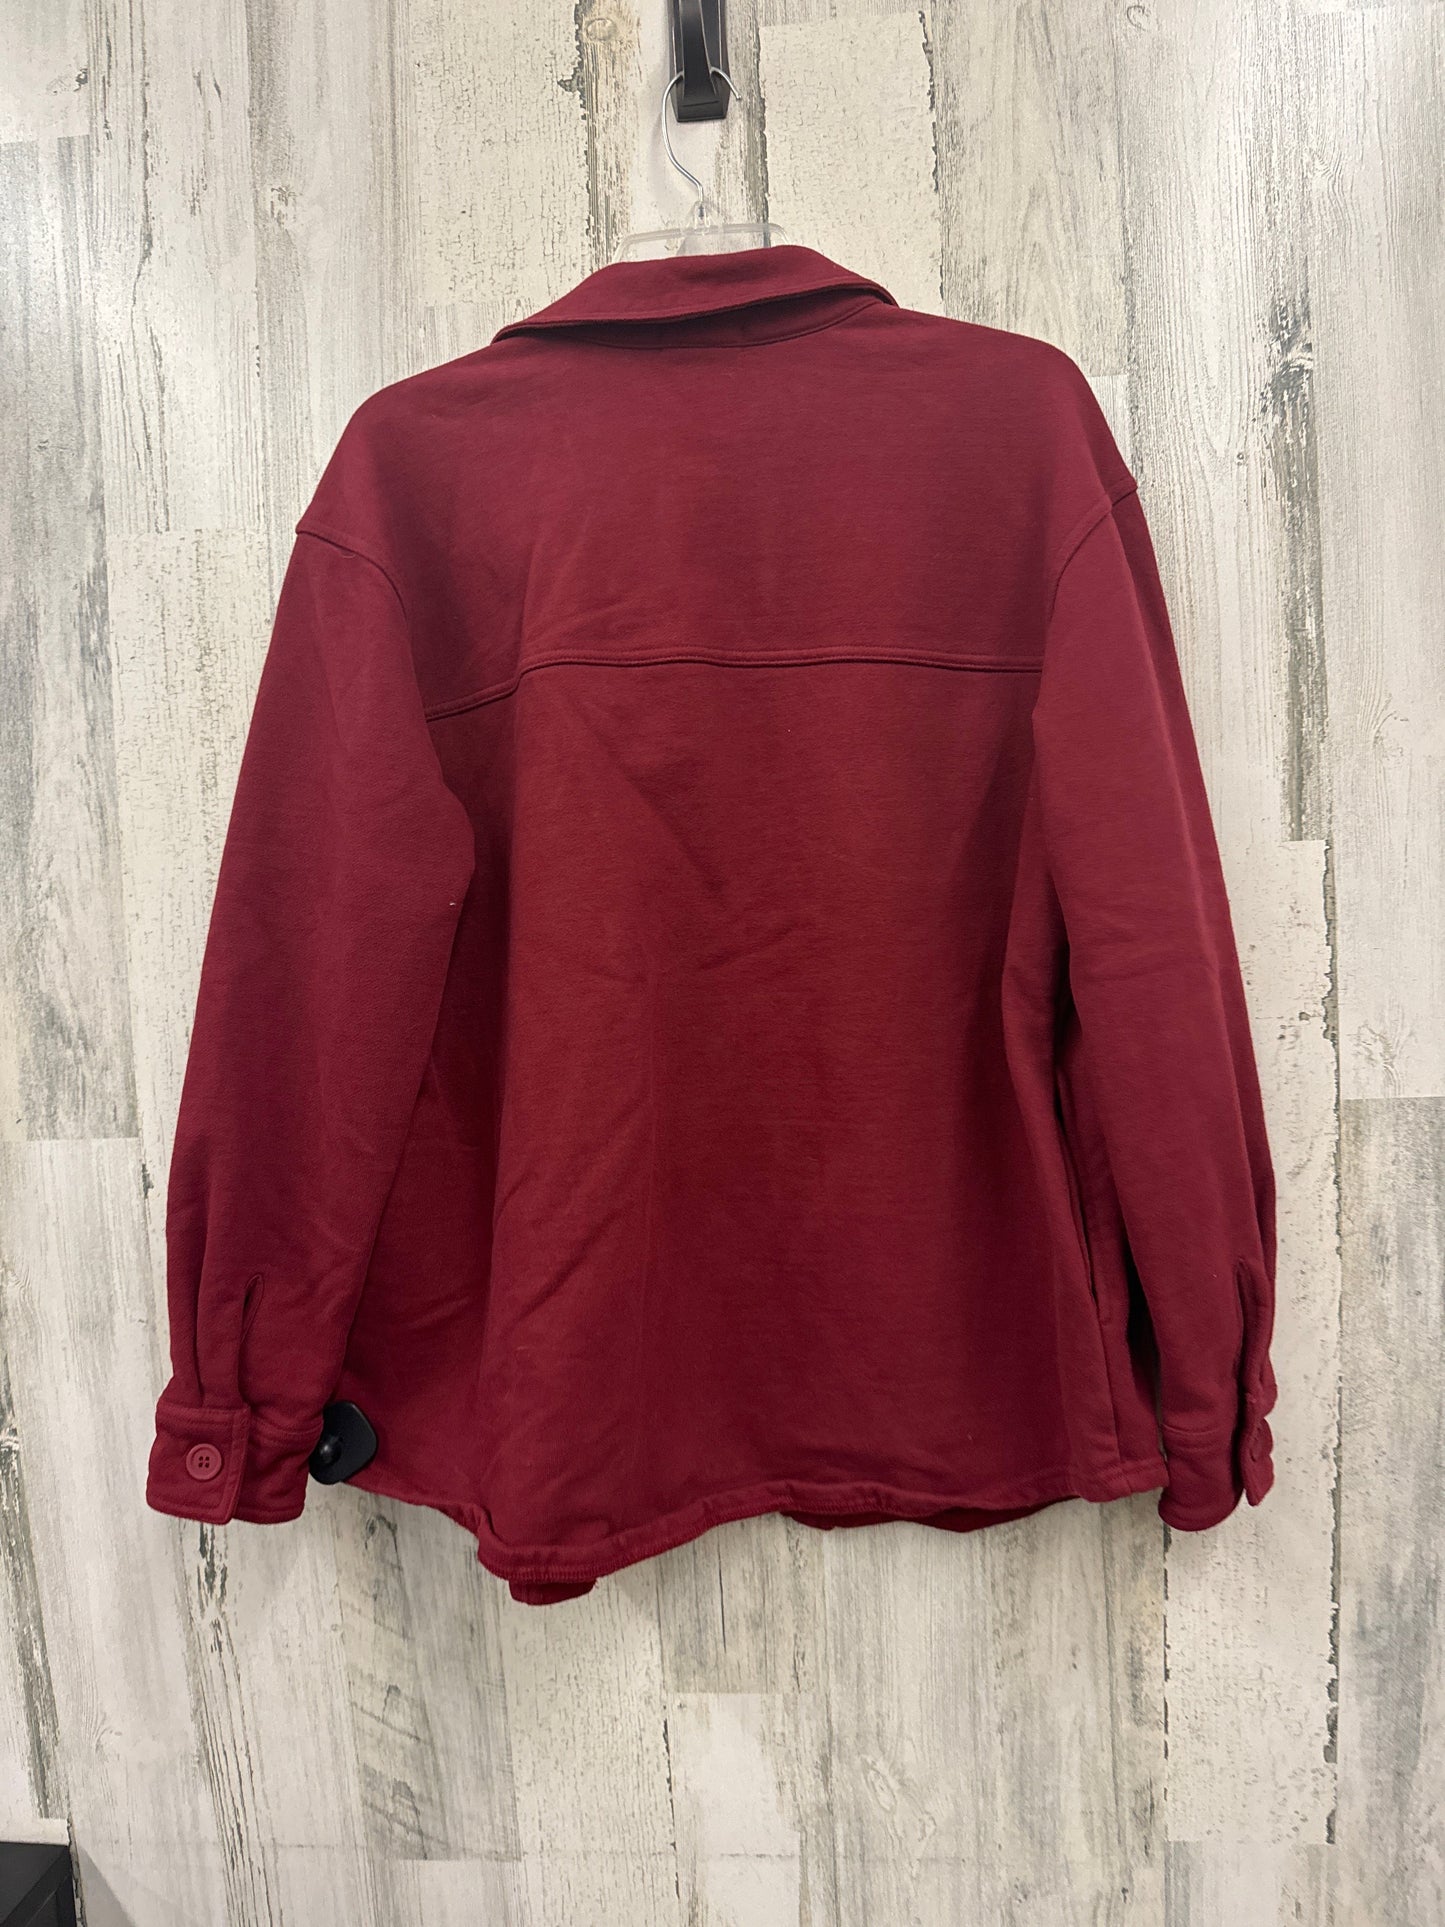 Top Long Sleeve By Good American  Size: S